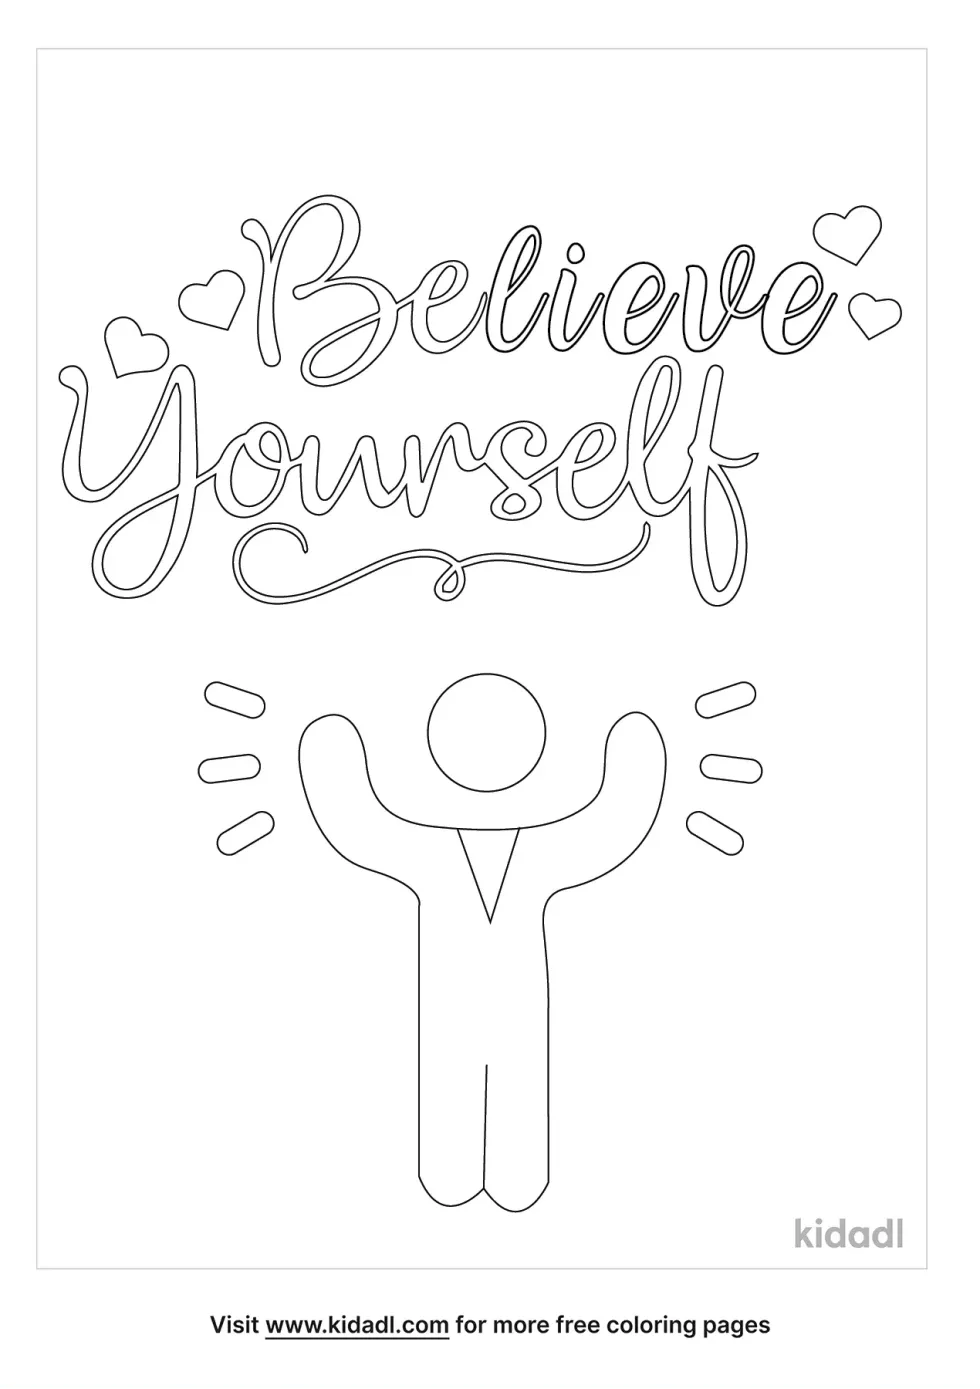 Believe Yourself Coloring Page